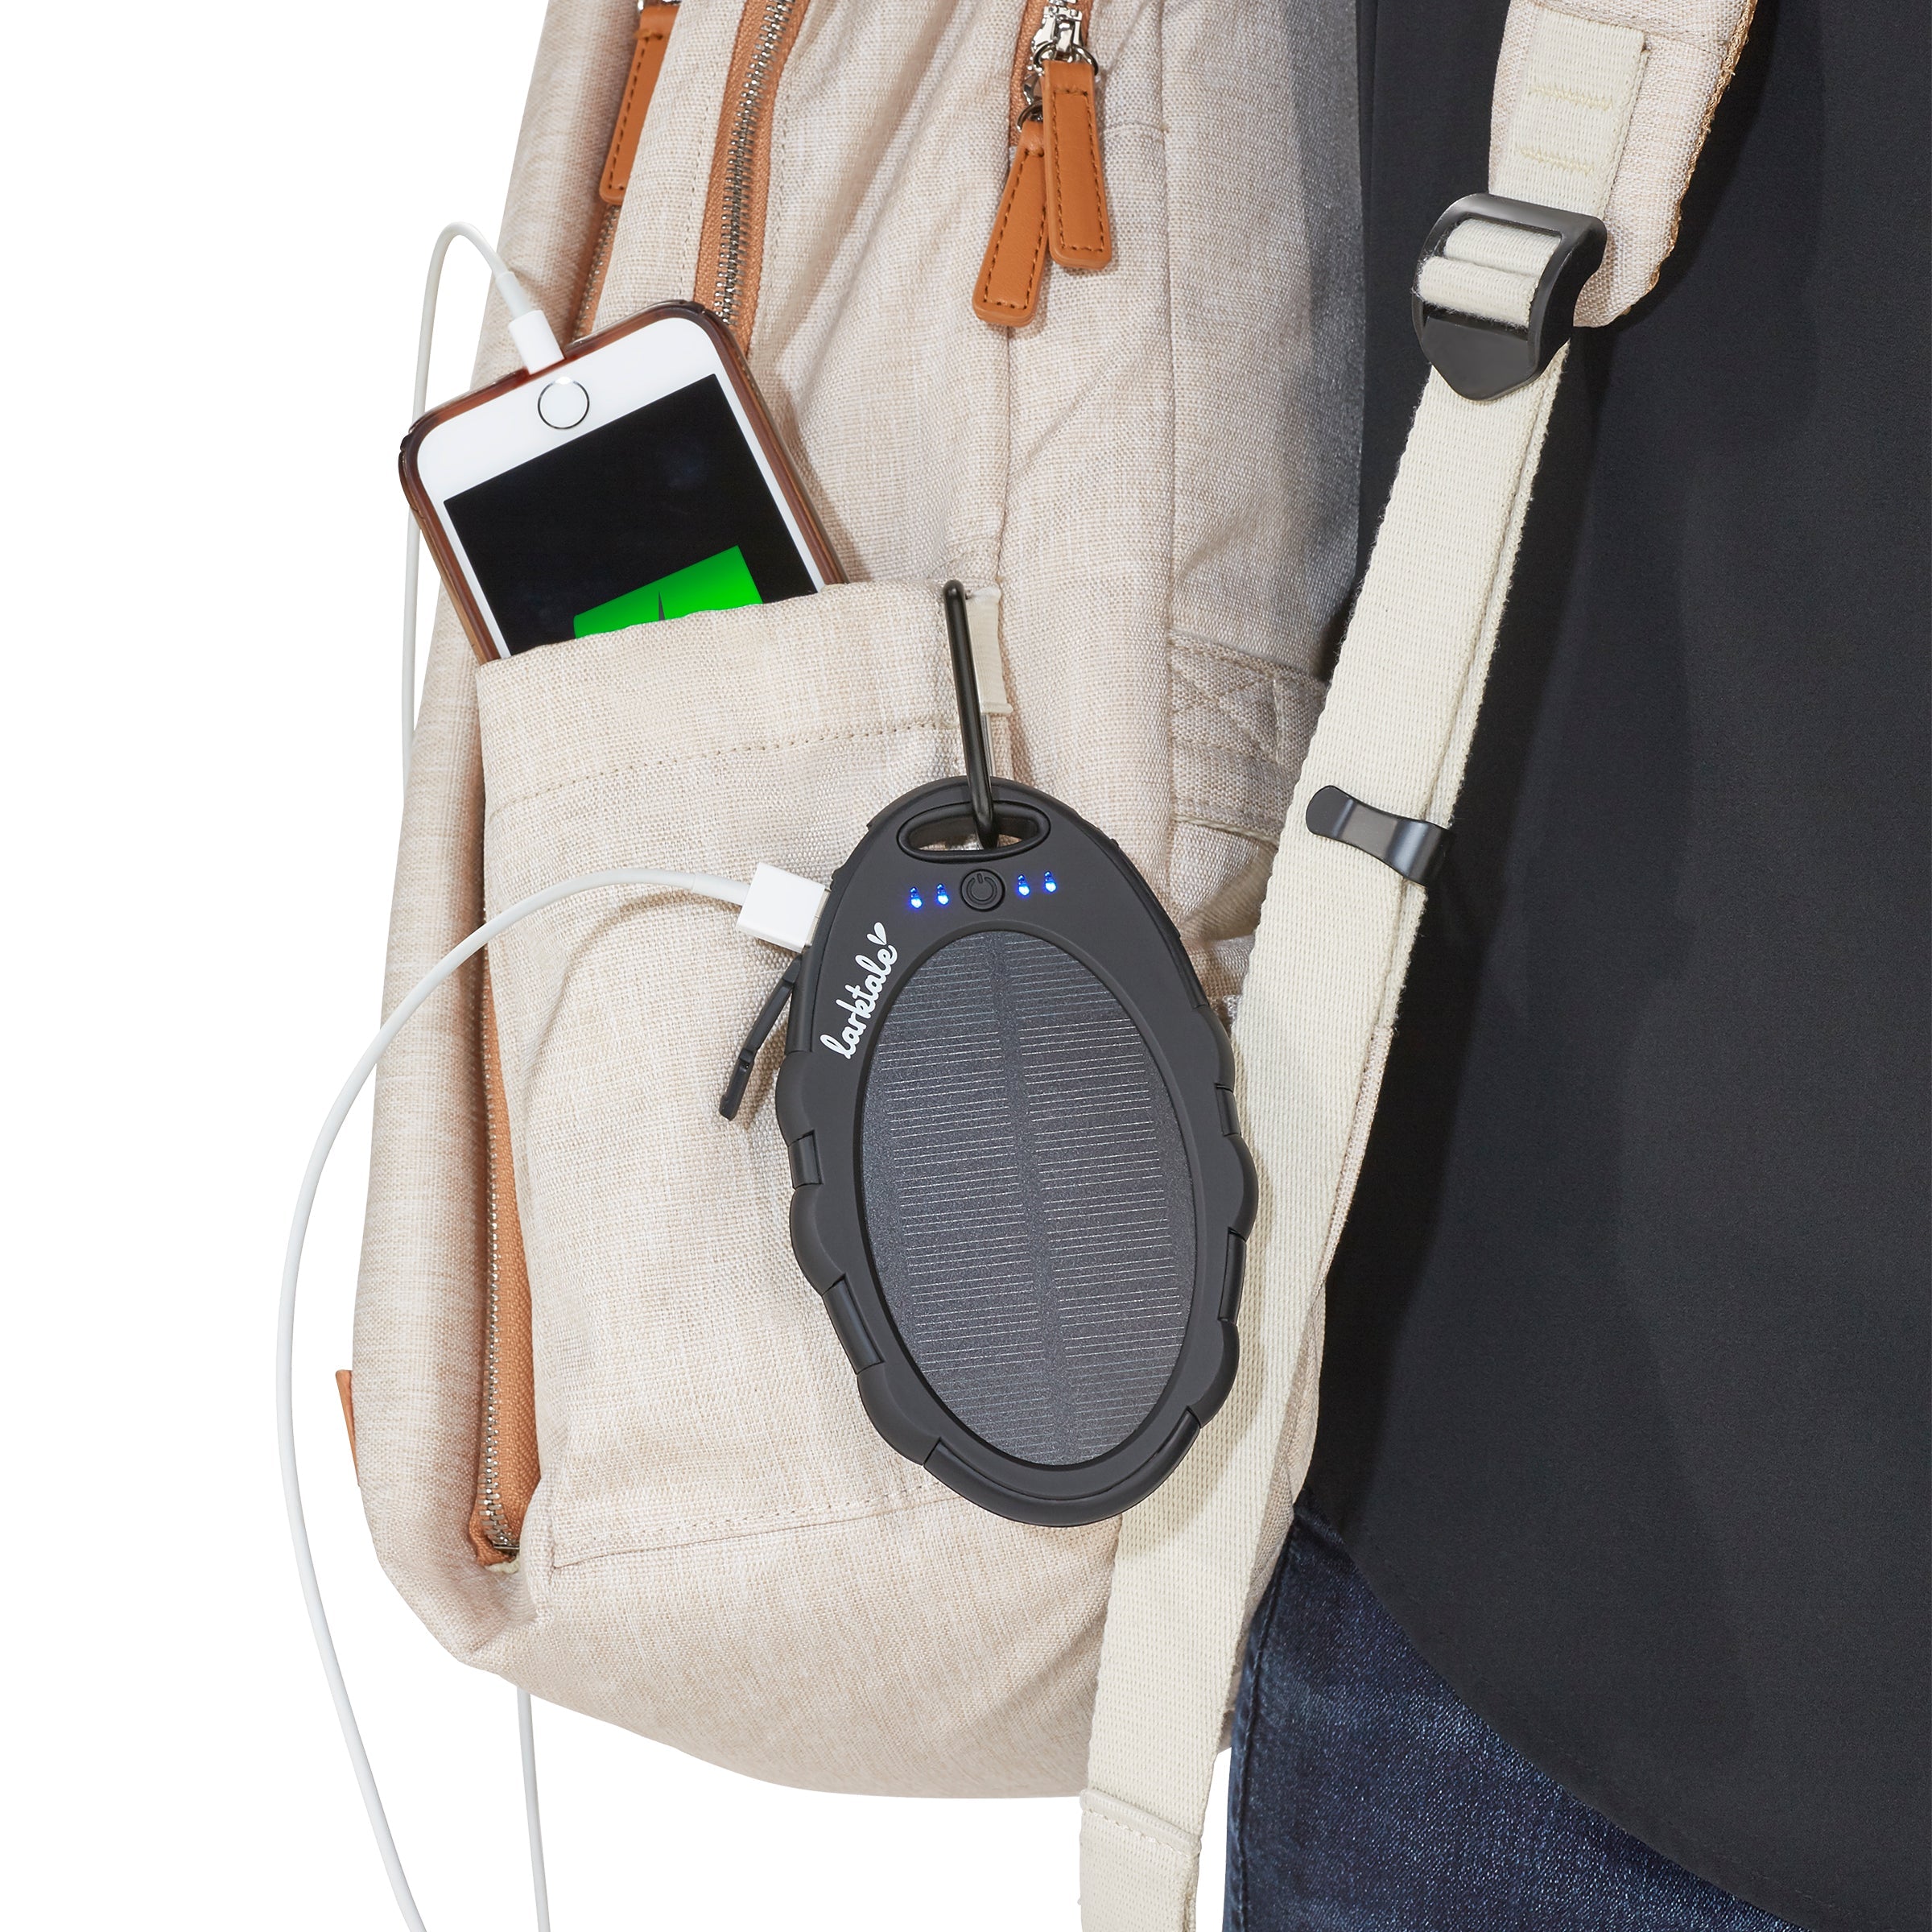 solar panel phone charger attached to backpack